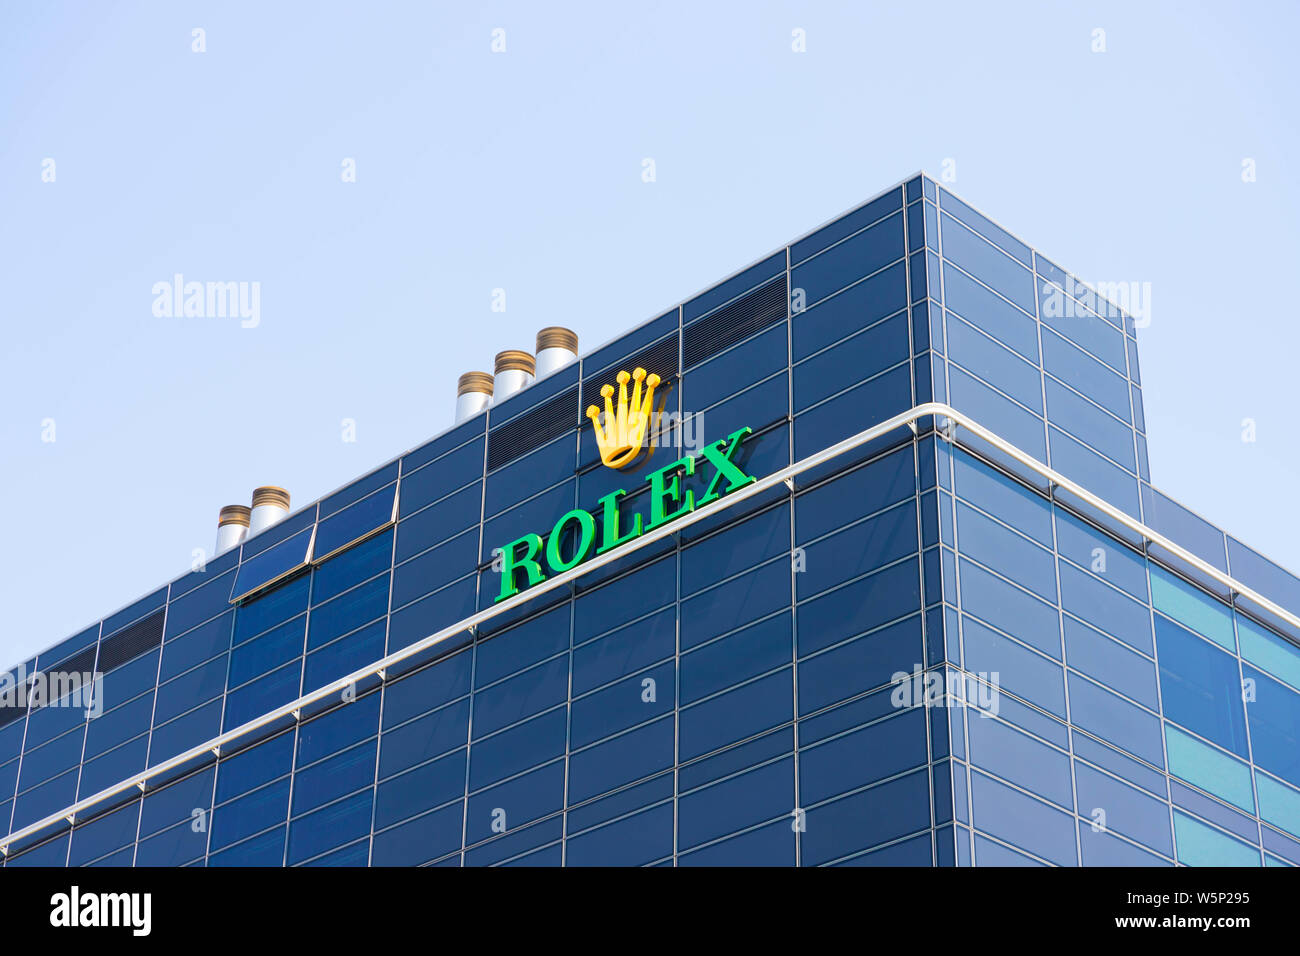 Rolex Watch Man High Resolution Stock Photography and Images - Alamy